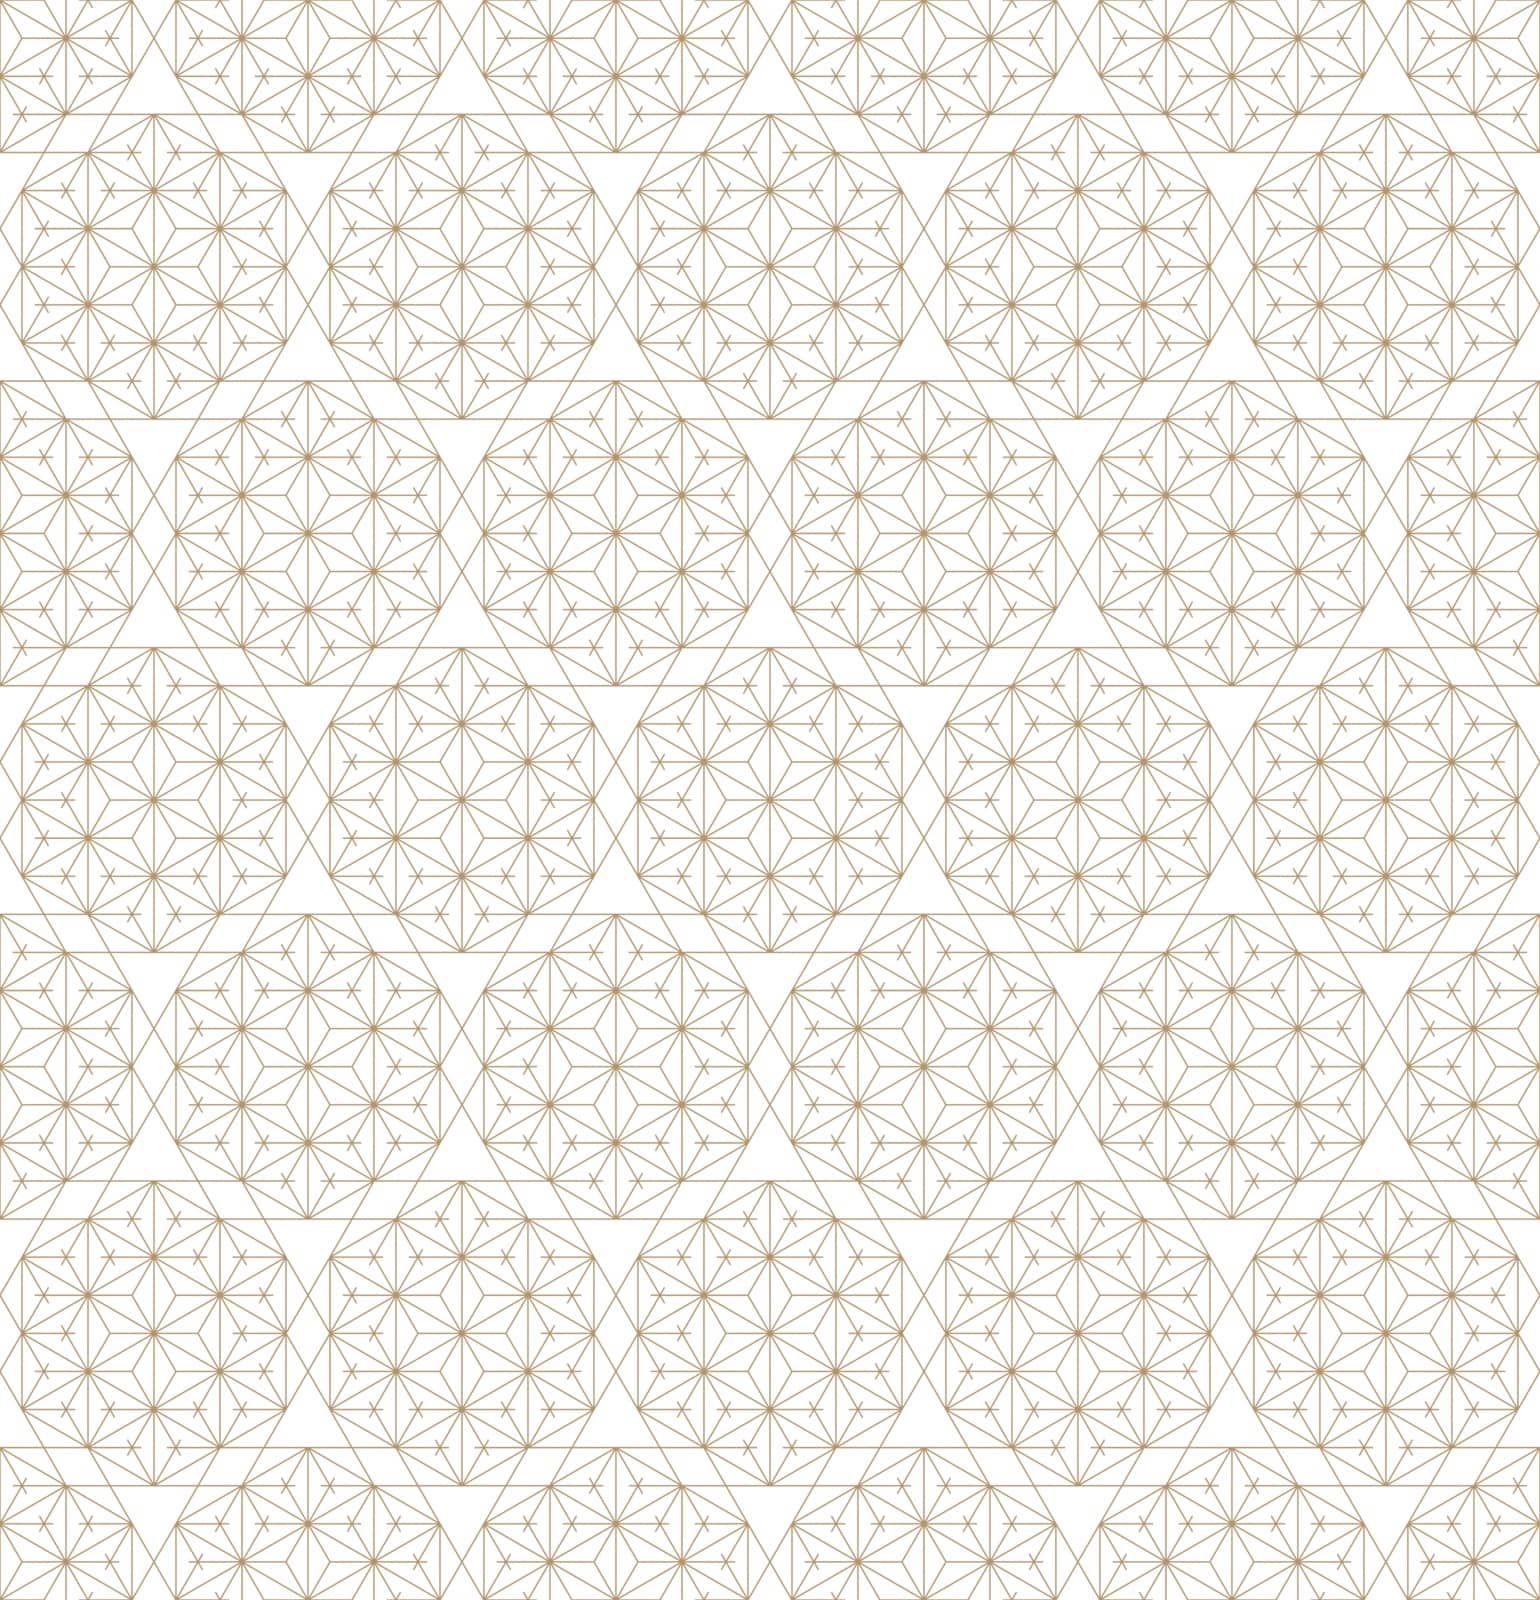 Japanese seamless pattern.For template,fabric,textile,wrapping paper,laser cutting and engraving. Background vector.Average thickness lines.Hexagon grid